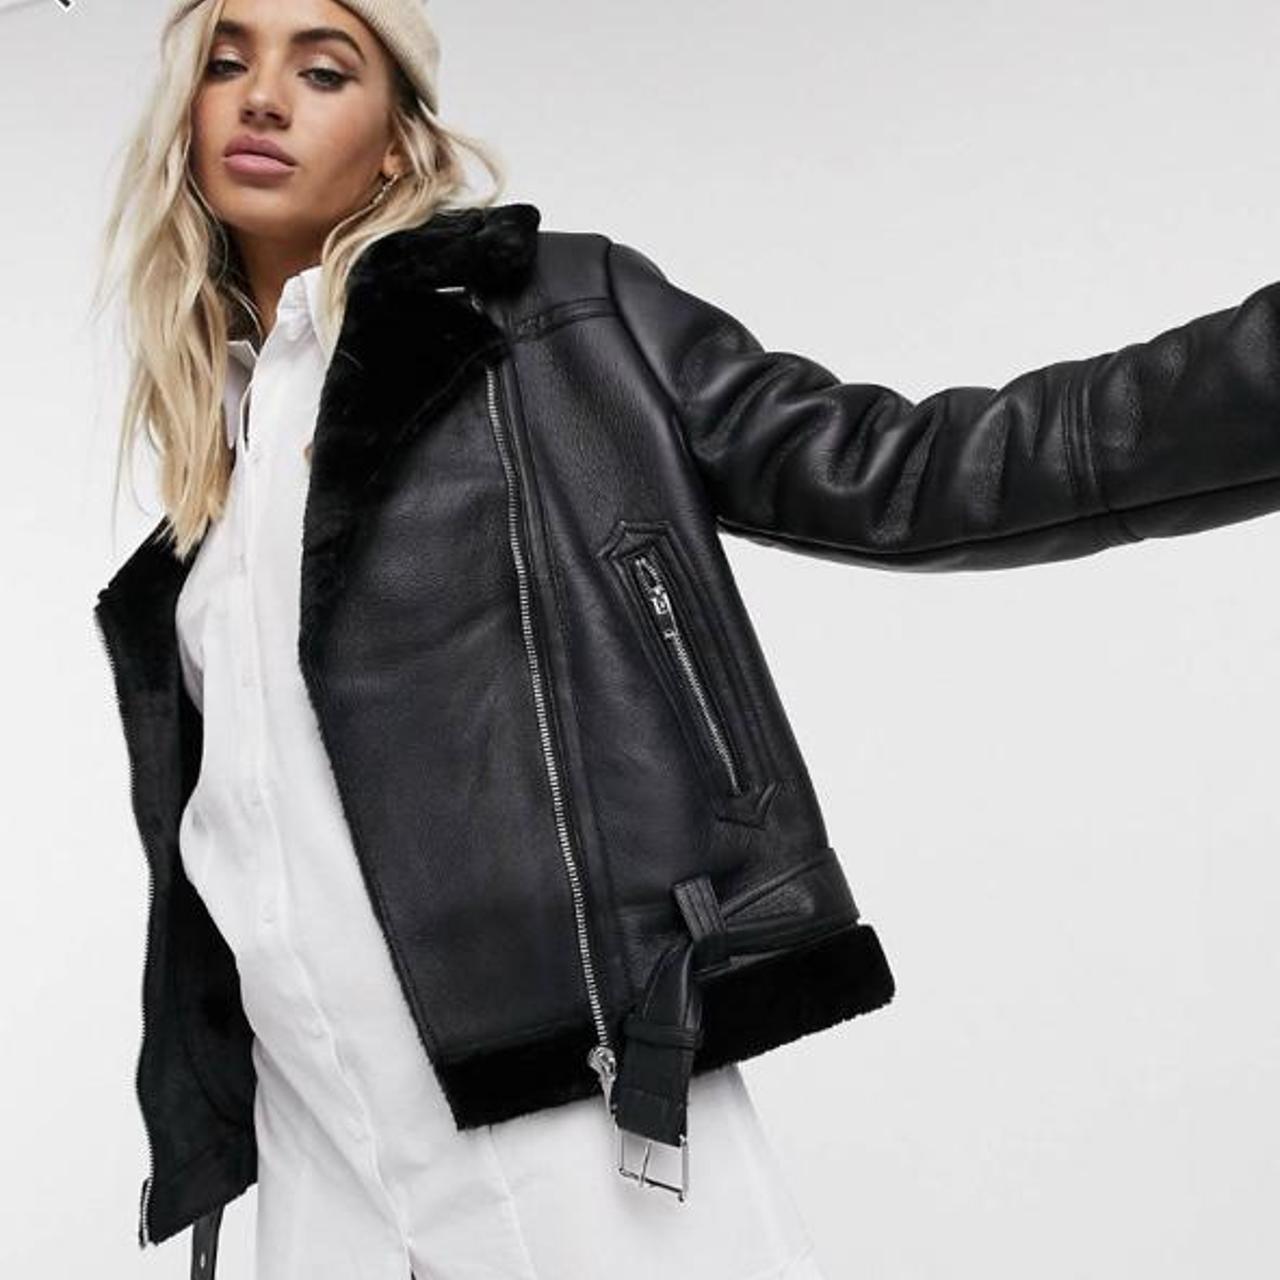 Topshop Petite faux leather shearling aviator biker jacket in off-white